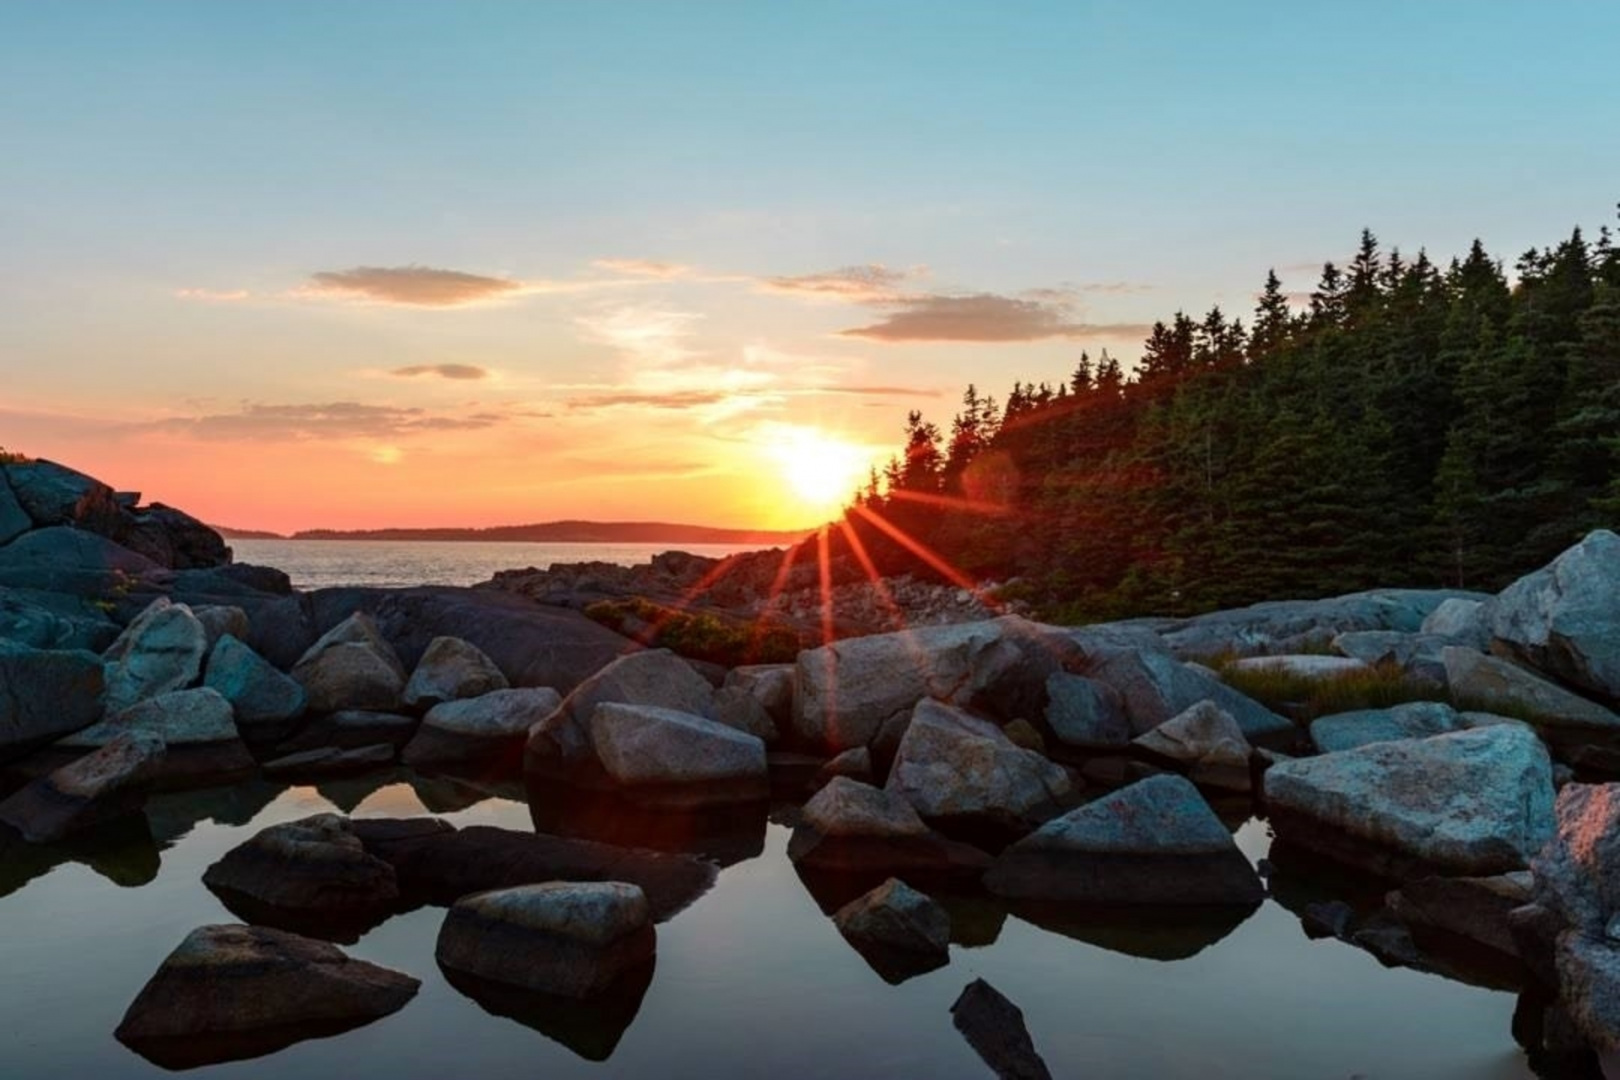 Sunset over the rocky shores of Acadia National Park.